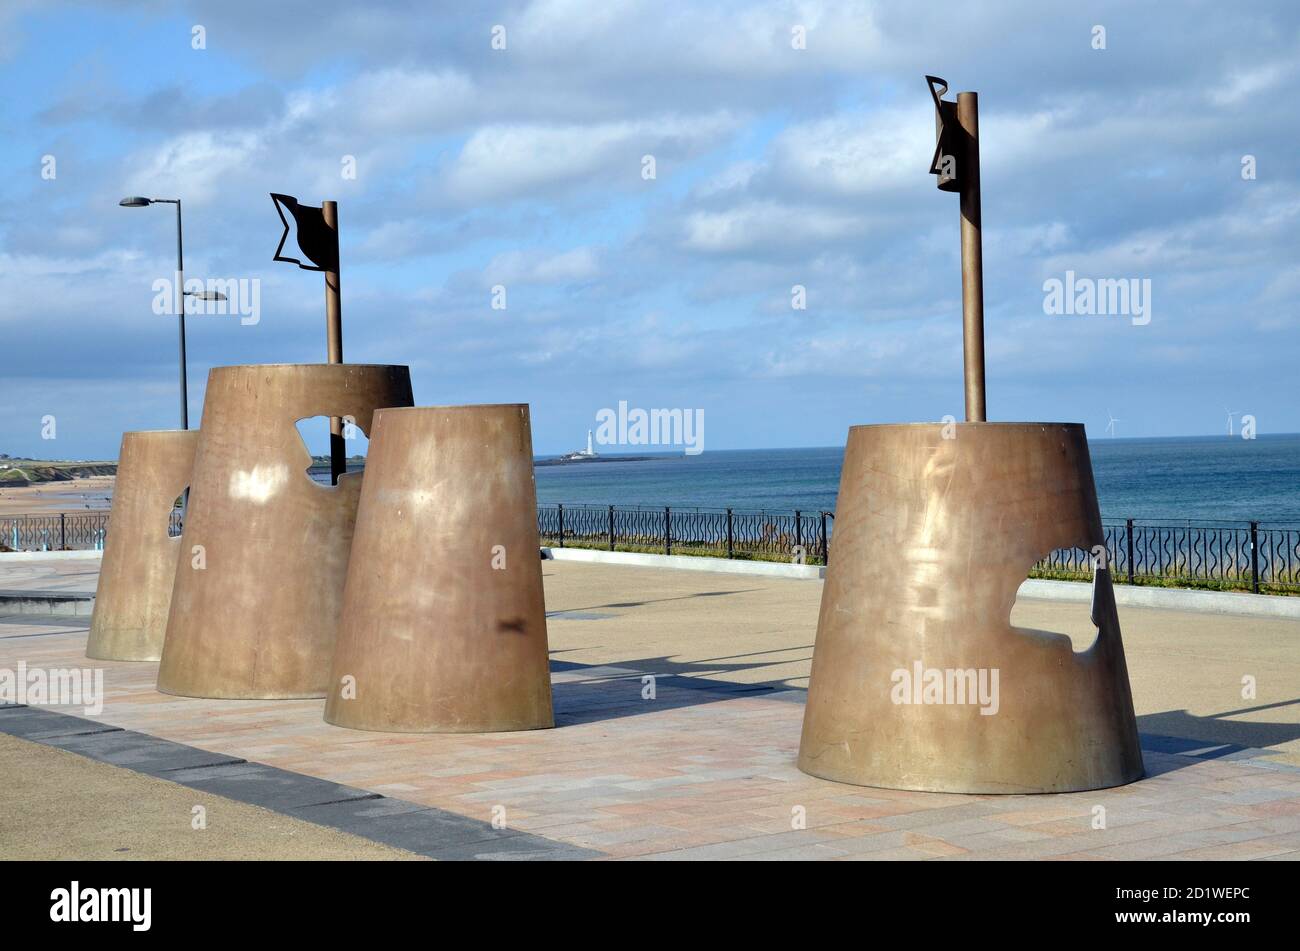 Sculptures on the seafront at Whitley Bay in Tyne & Wear. Stock Photo